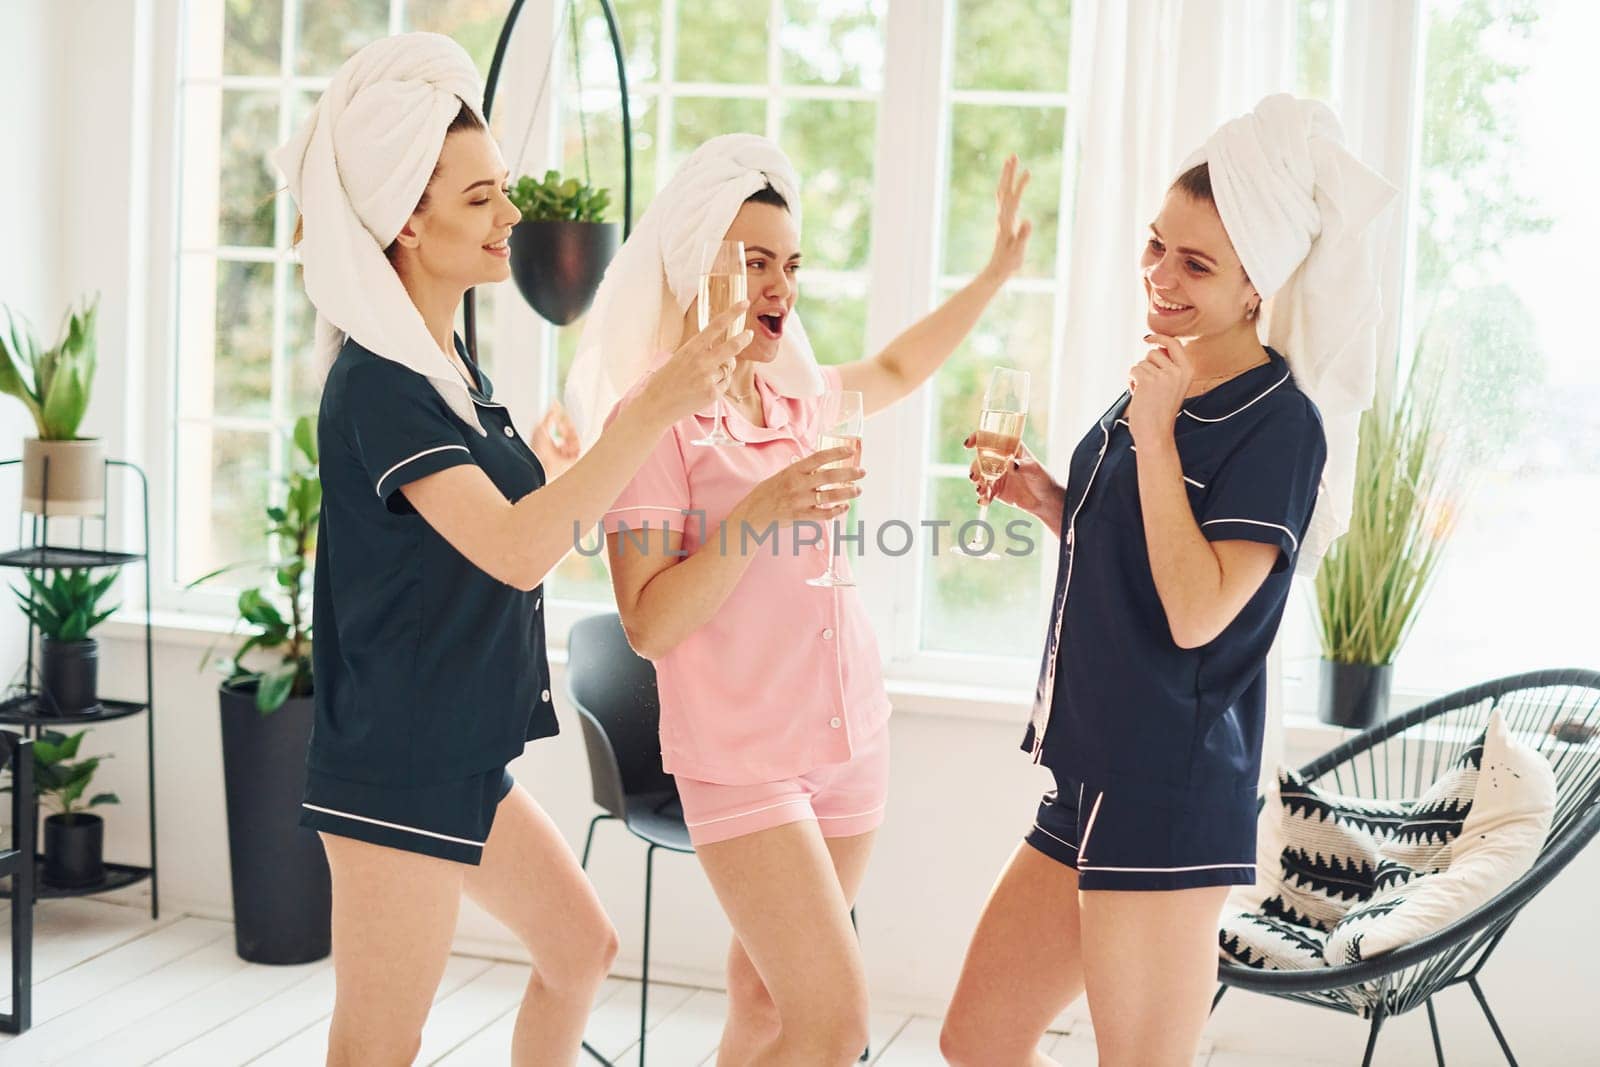 Cheerful young women in pajamas having fun indoors at daytime together.